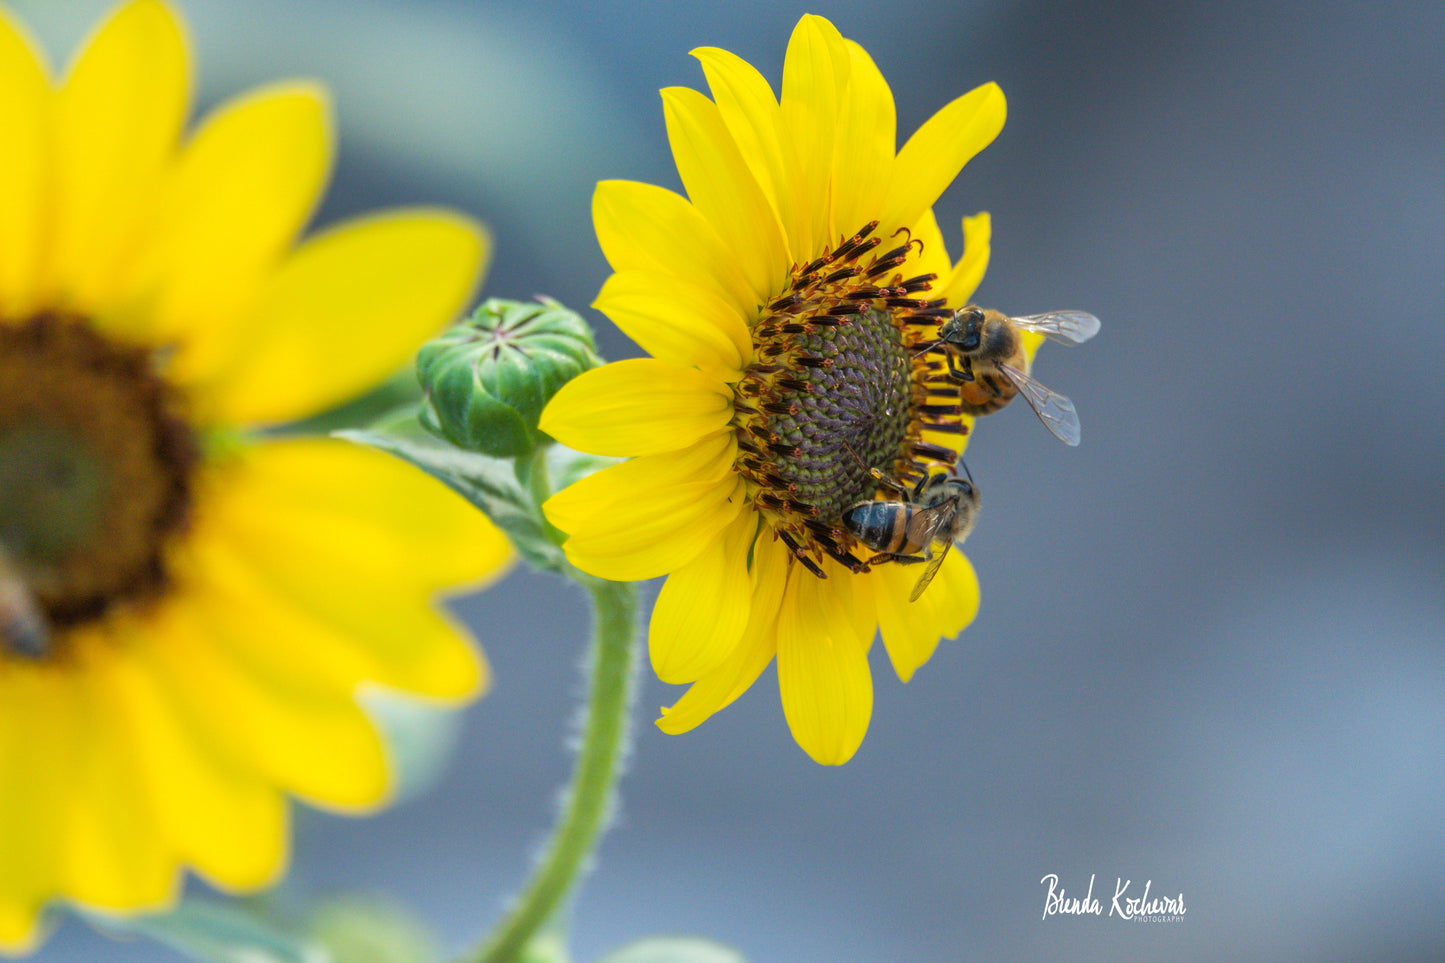 Two Daisies & Bees Greeting Card